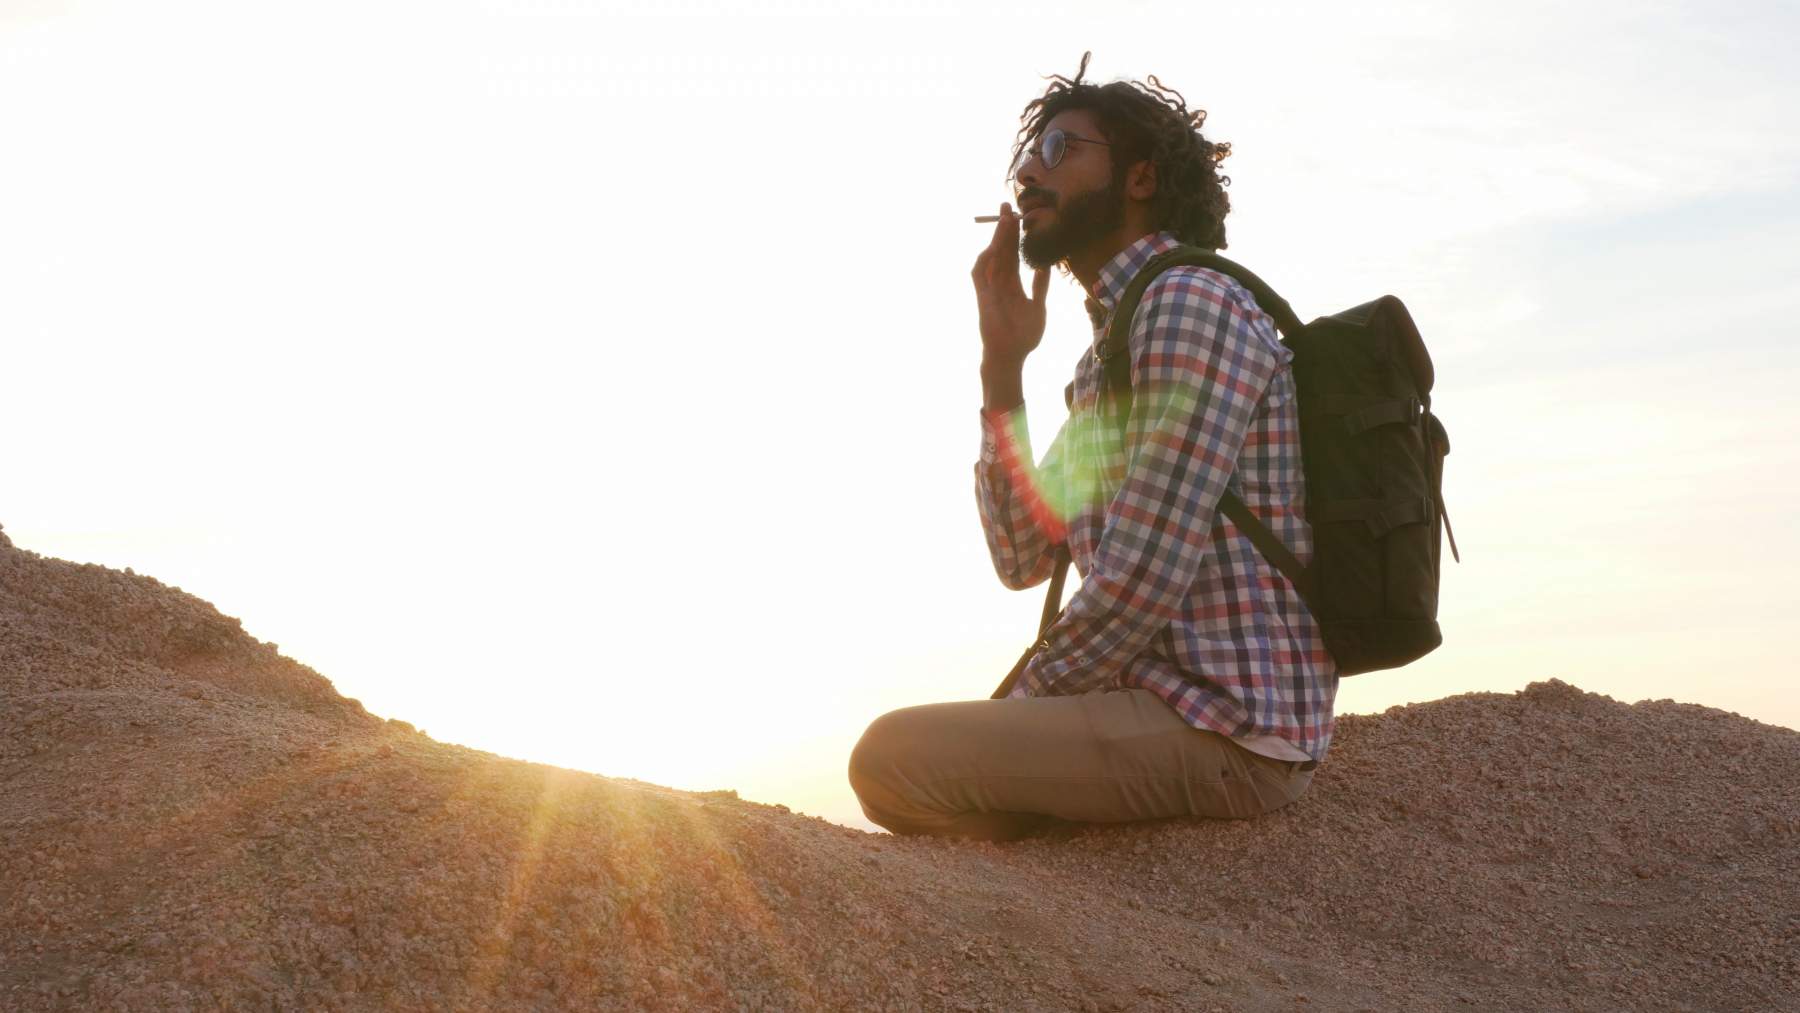 A person with a backpack and sunglasses kneels on a rocky hill at sunset, holding a small object near their mouth.